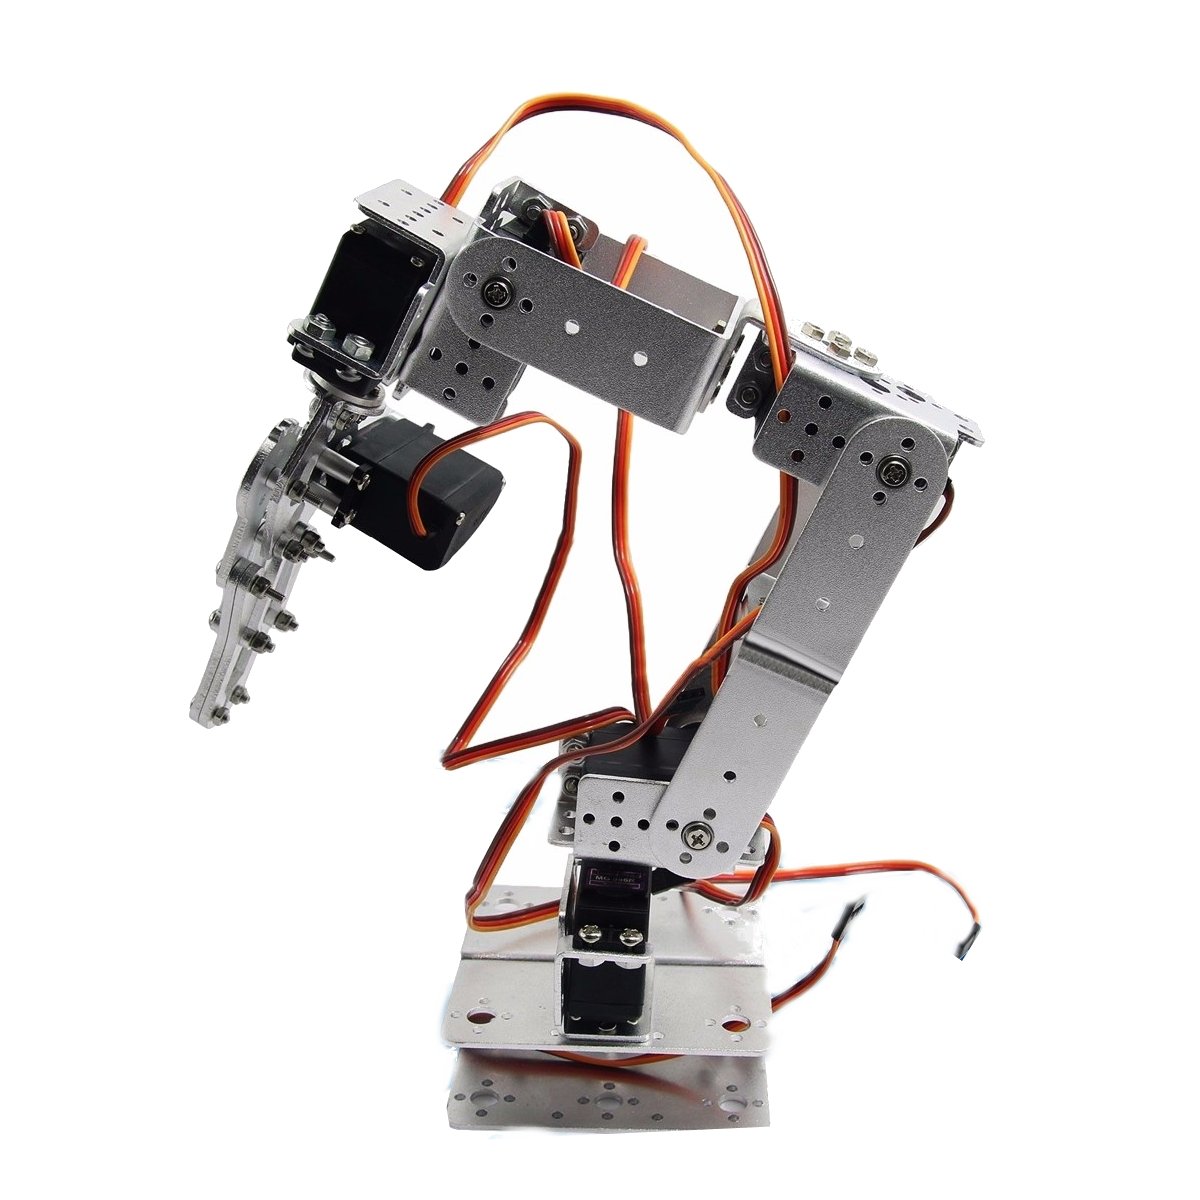 ROT2U 6DOF Aluminium Robot Arm Clamp Claw Mount Kit With Servos For Arduino-Silver 1